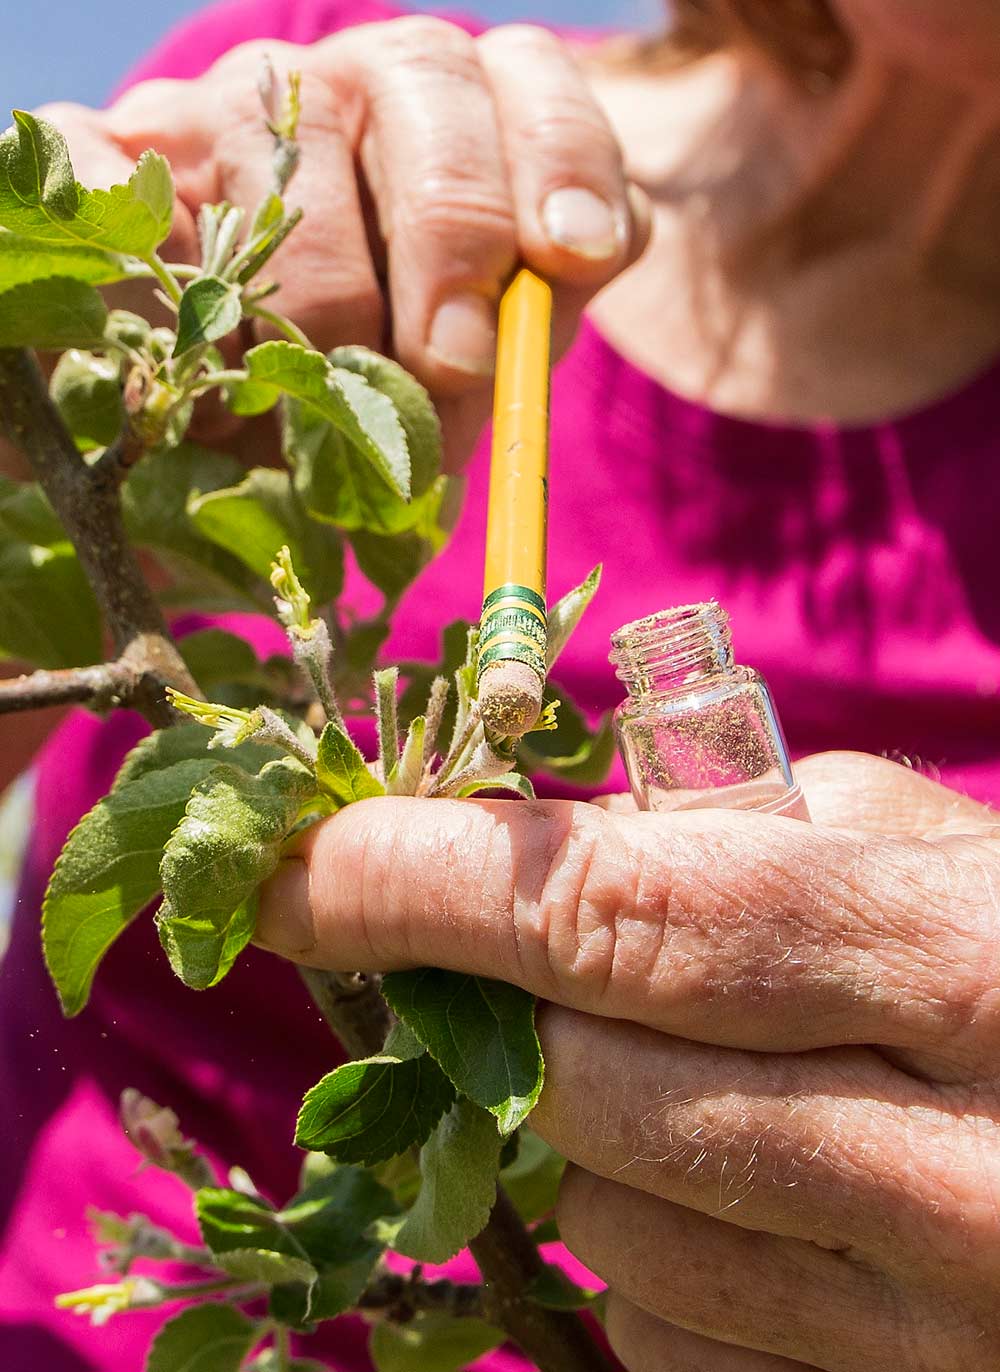 The hunt for new varieties continues, as research technician Bonnie Schonberg uses a pencil eraser to apply pollen to the stamens of an unnamed variety at the university's Sunrise research orchard near Wenatchee. Schonberg previously stripped and emasculated the blooms to isolate the cross pollination. (Ross Courtney/Good Fruit Grower)